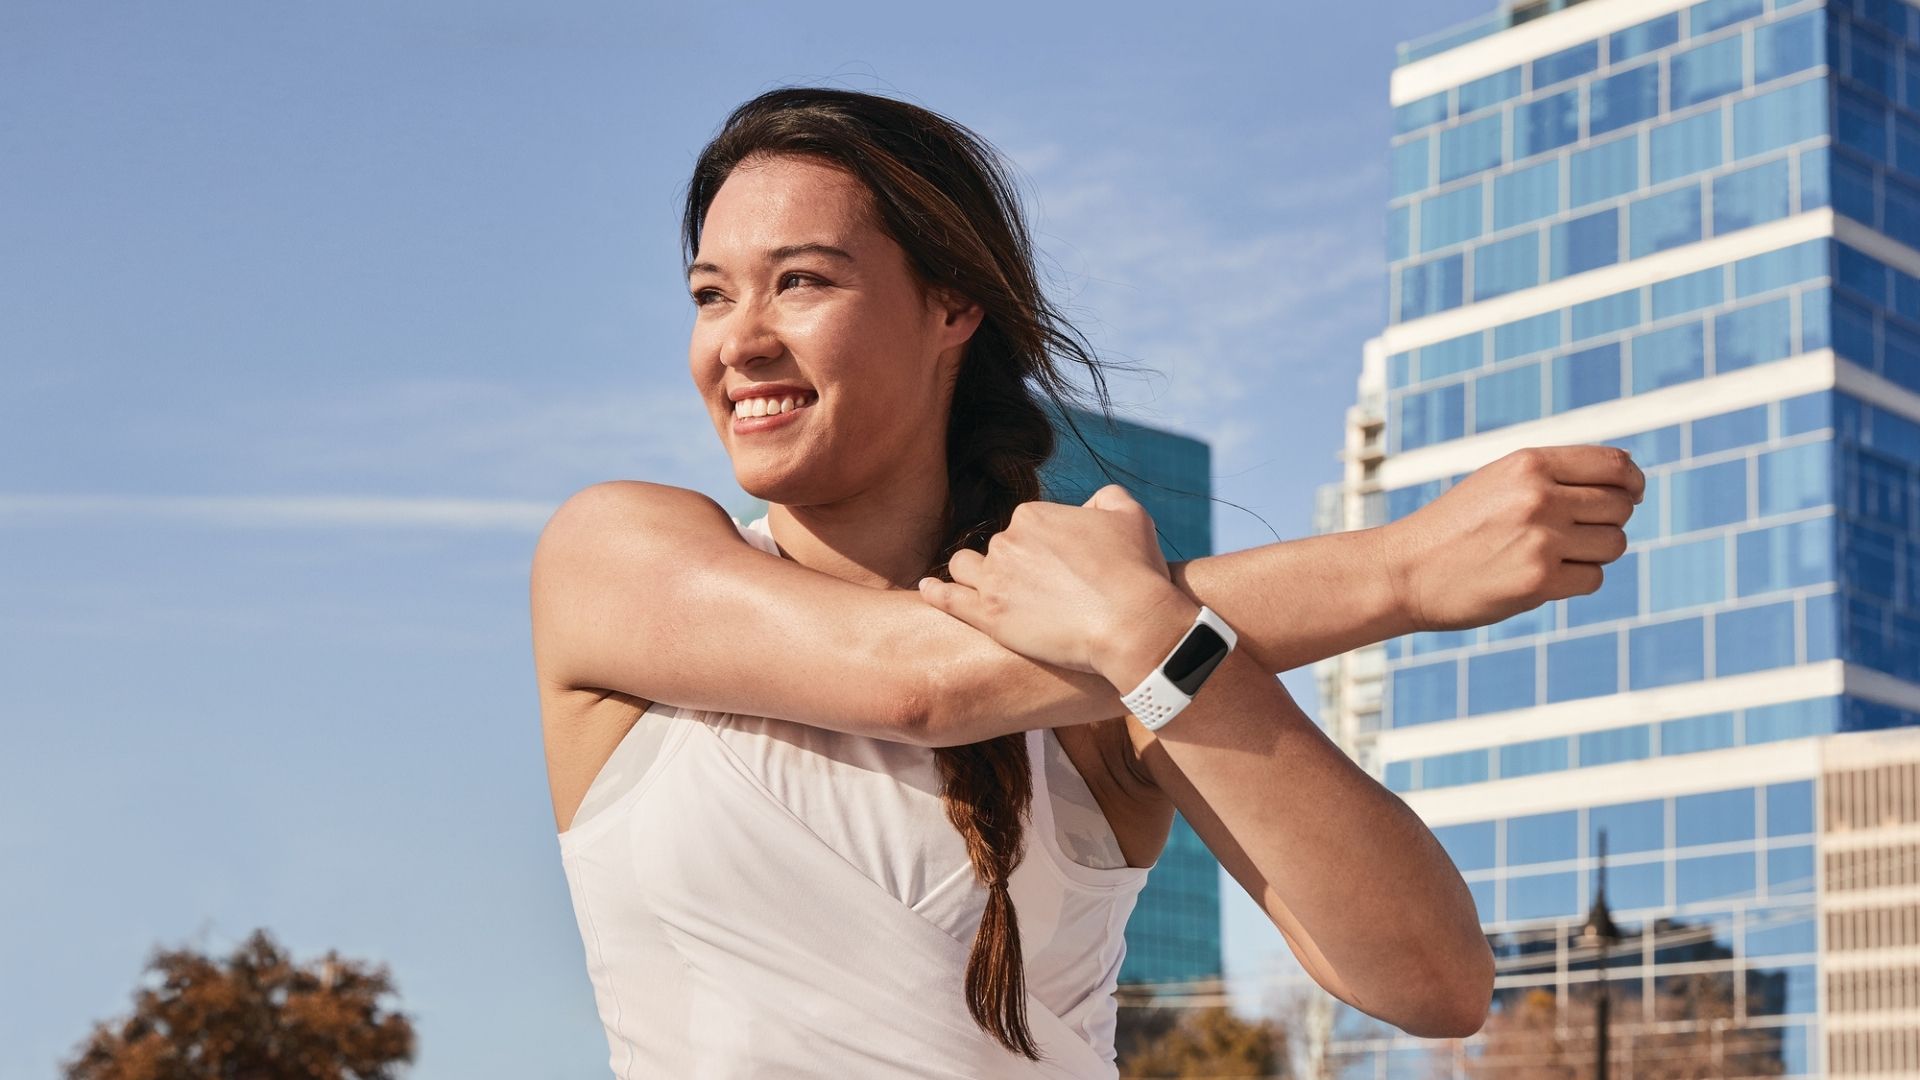 Your Fitbit become your personal running coach Advnture